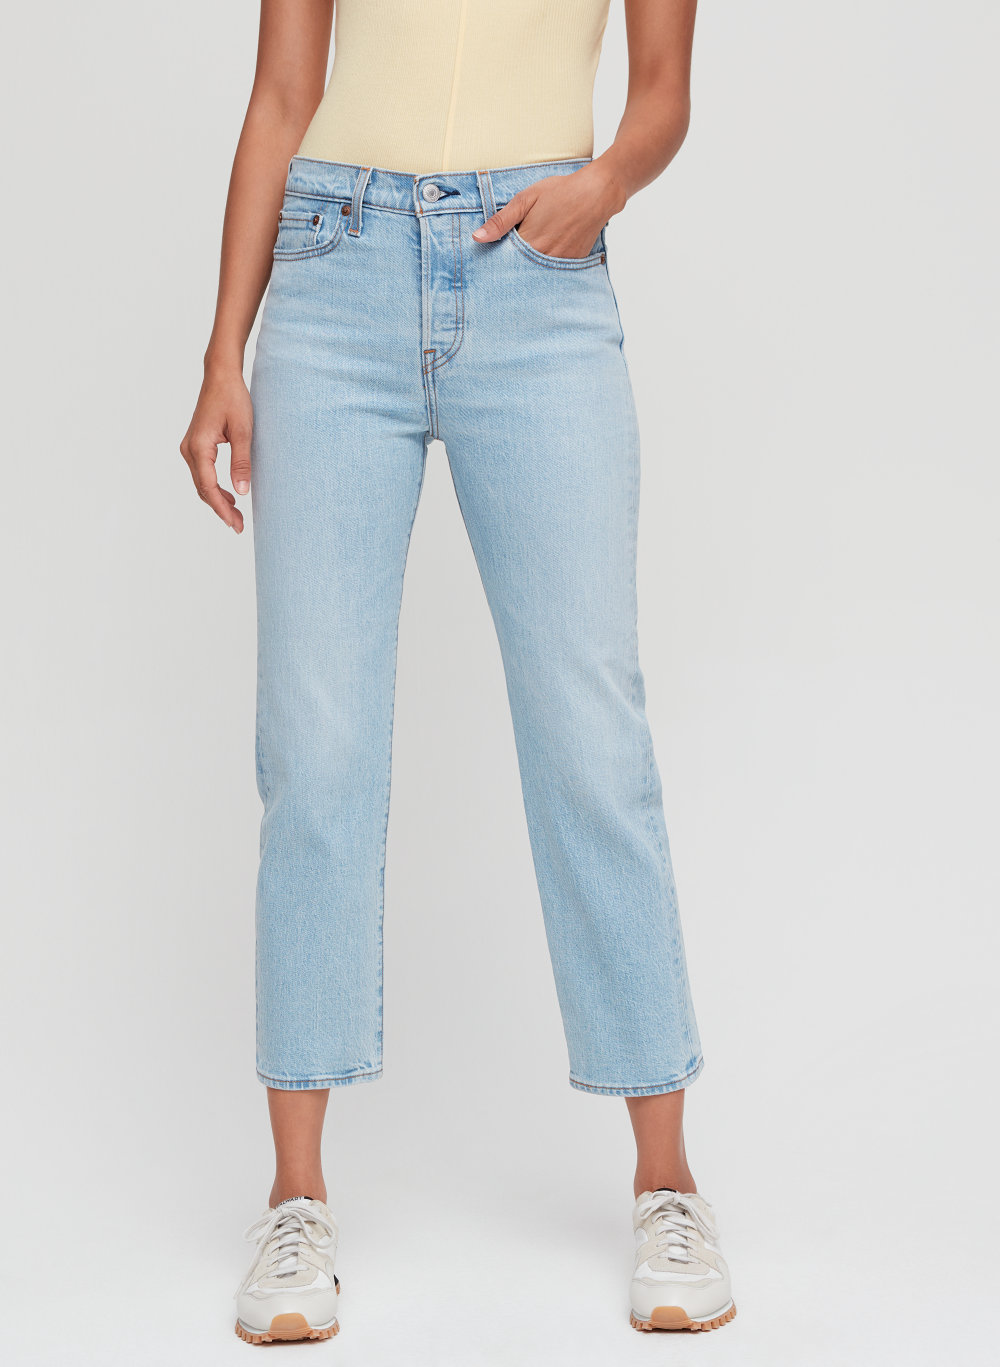 levis dibs wedgie straight jeans